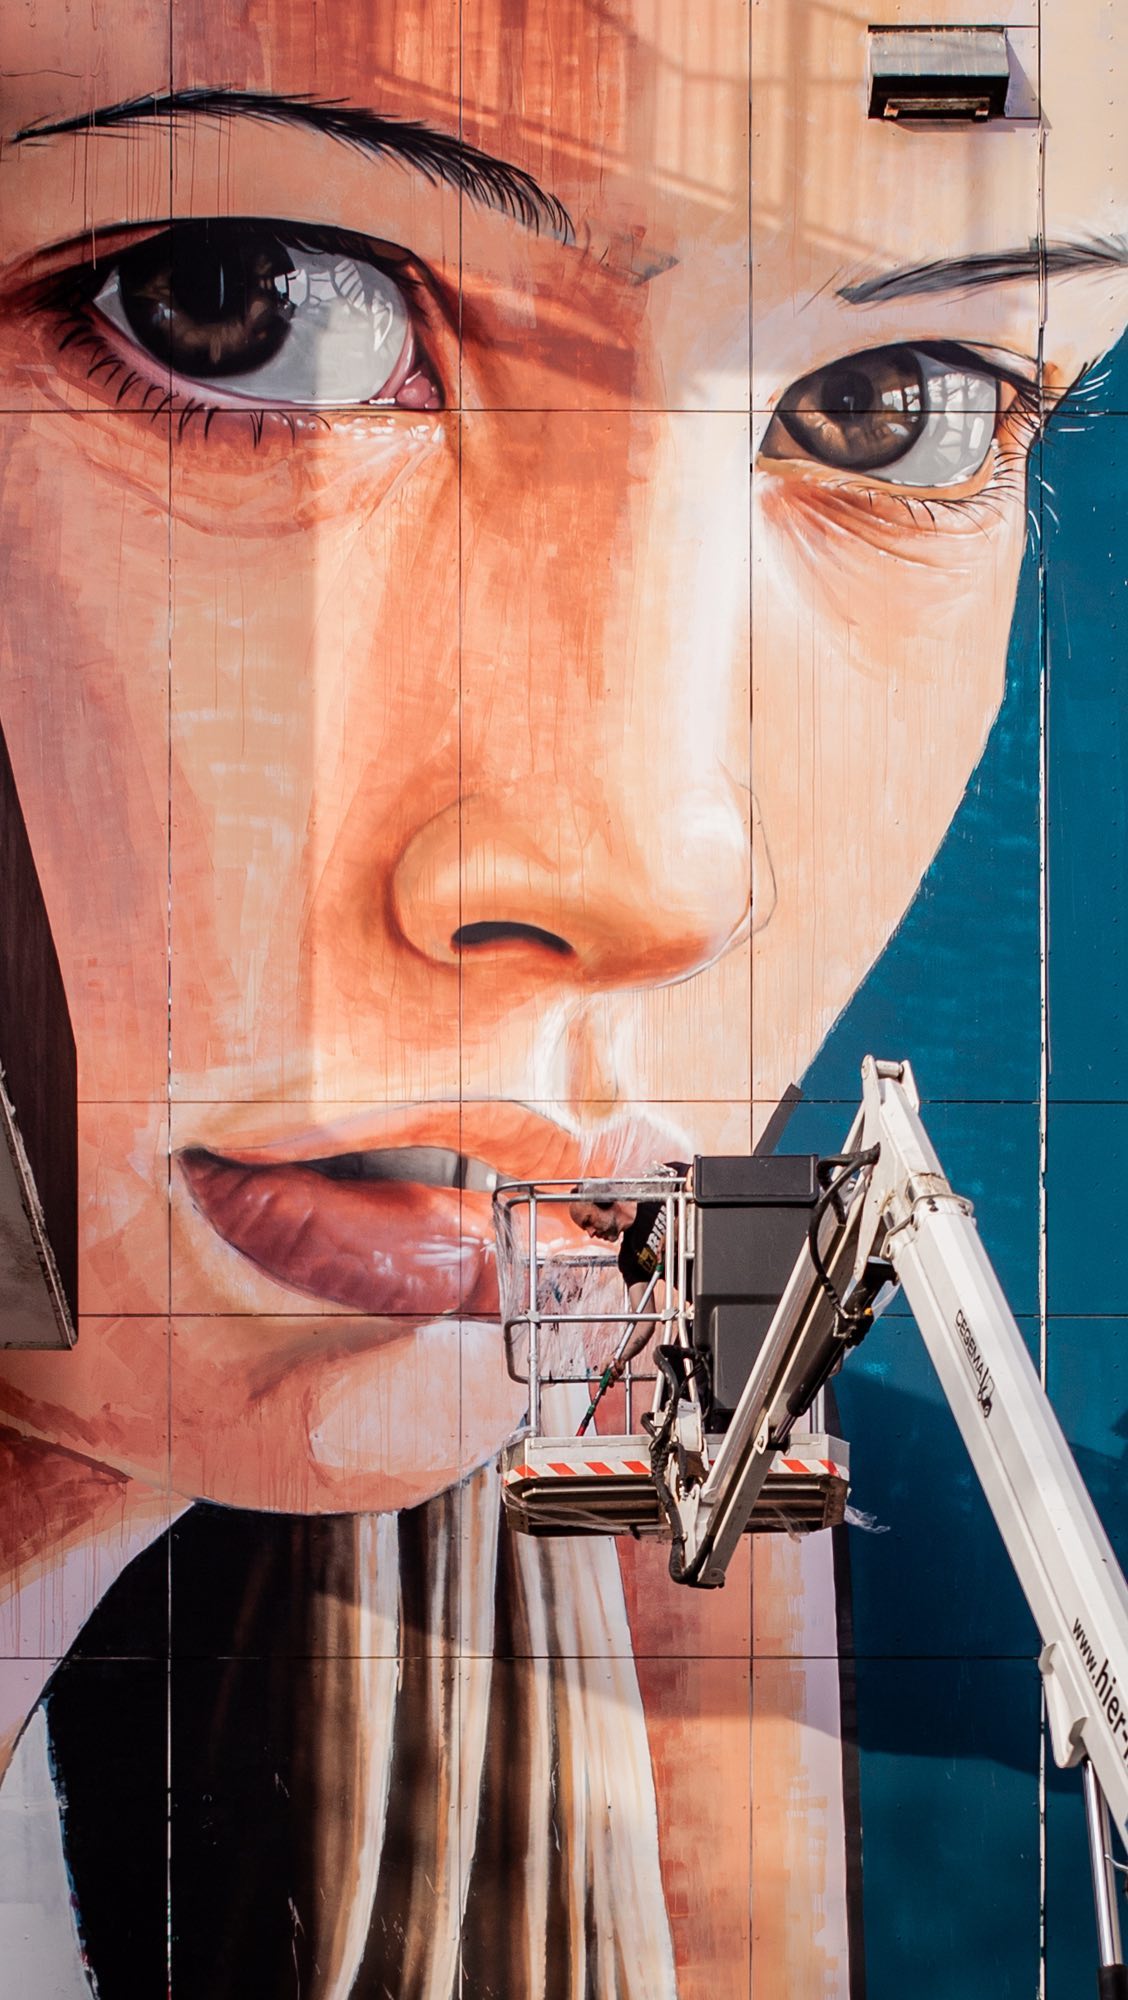 Being in full preparations of upcoming projects, I'm happy to finally share this making of clip with you. I finished the mural version of 'When David Turned Into Goliath' a month ago at the spy tower on Teufelsberg, Berlin. It was the first wall of that size completely painted on every inch, also including the staircase. Enjoy watching. 

#makingof #makingofclip #makingofvideo #urbancontemporaryart #urbanart #muralism #newmural #muralart #muralist #photorealism #photorealistic #photorealisticartwork #photorealisticart #urbanbeautyfication #streetart #davidandgoliath #female #femalepower #heroines #sheroes #womeninart #powertothewomen #largerthanlife #portraits #childrenportraits #childportrait #acrylicpaint #spraypaint #spraycanart #akutdetail

❤️@schusa